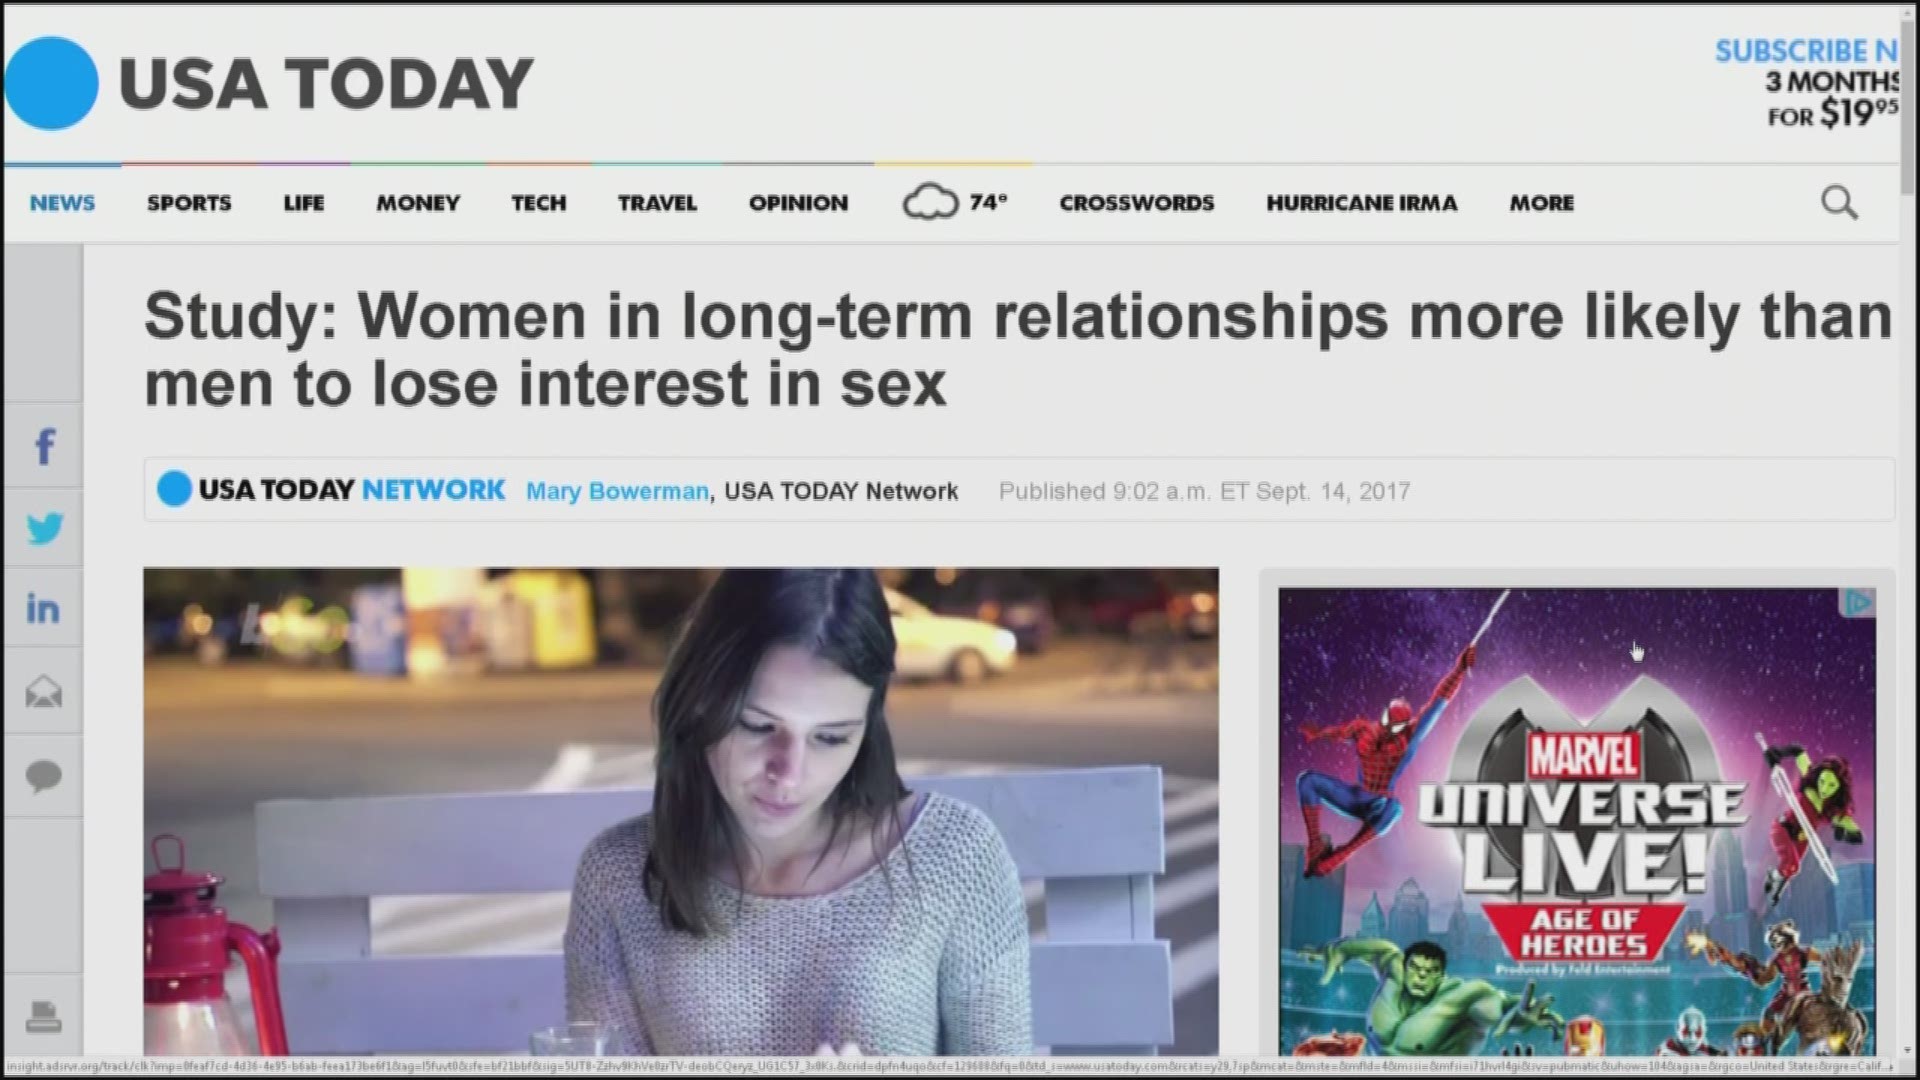 Women in longterm relationships more likely to lose interest in sex, according to new study abc10 picture